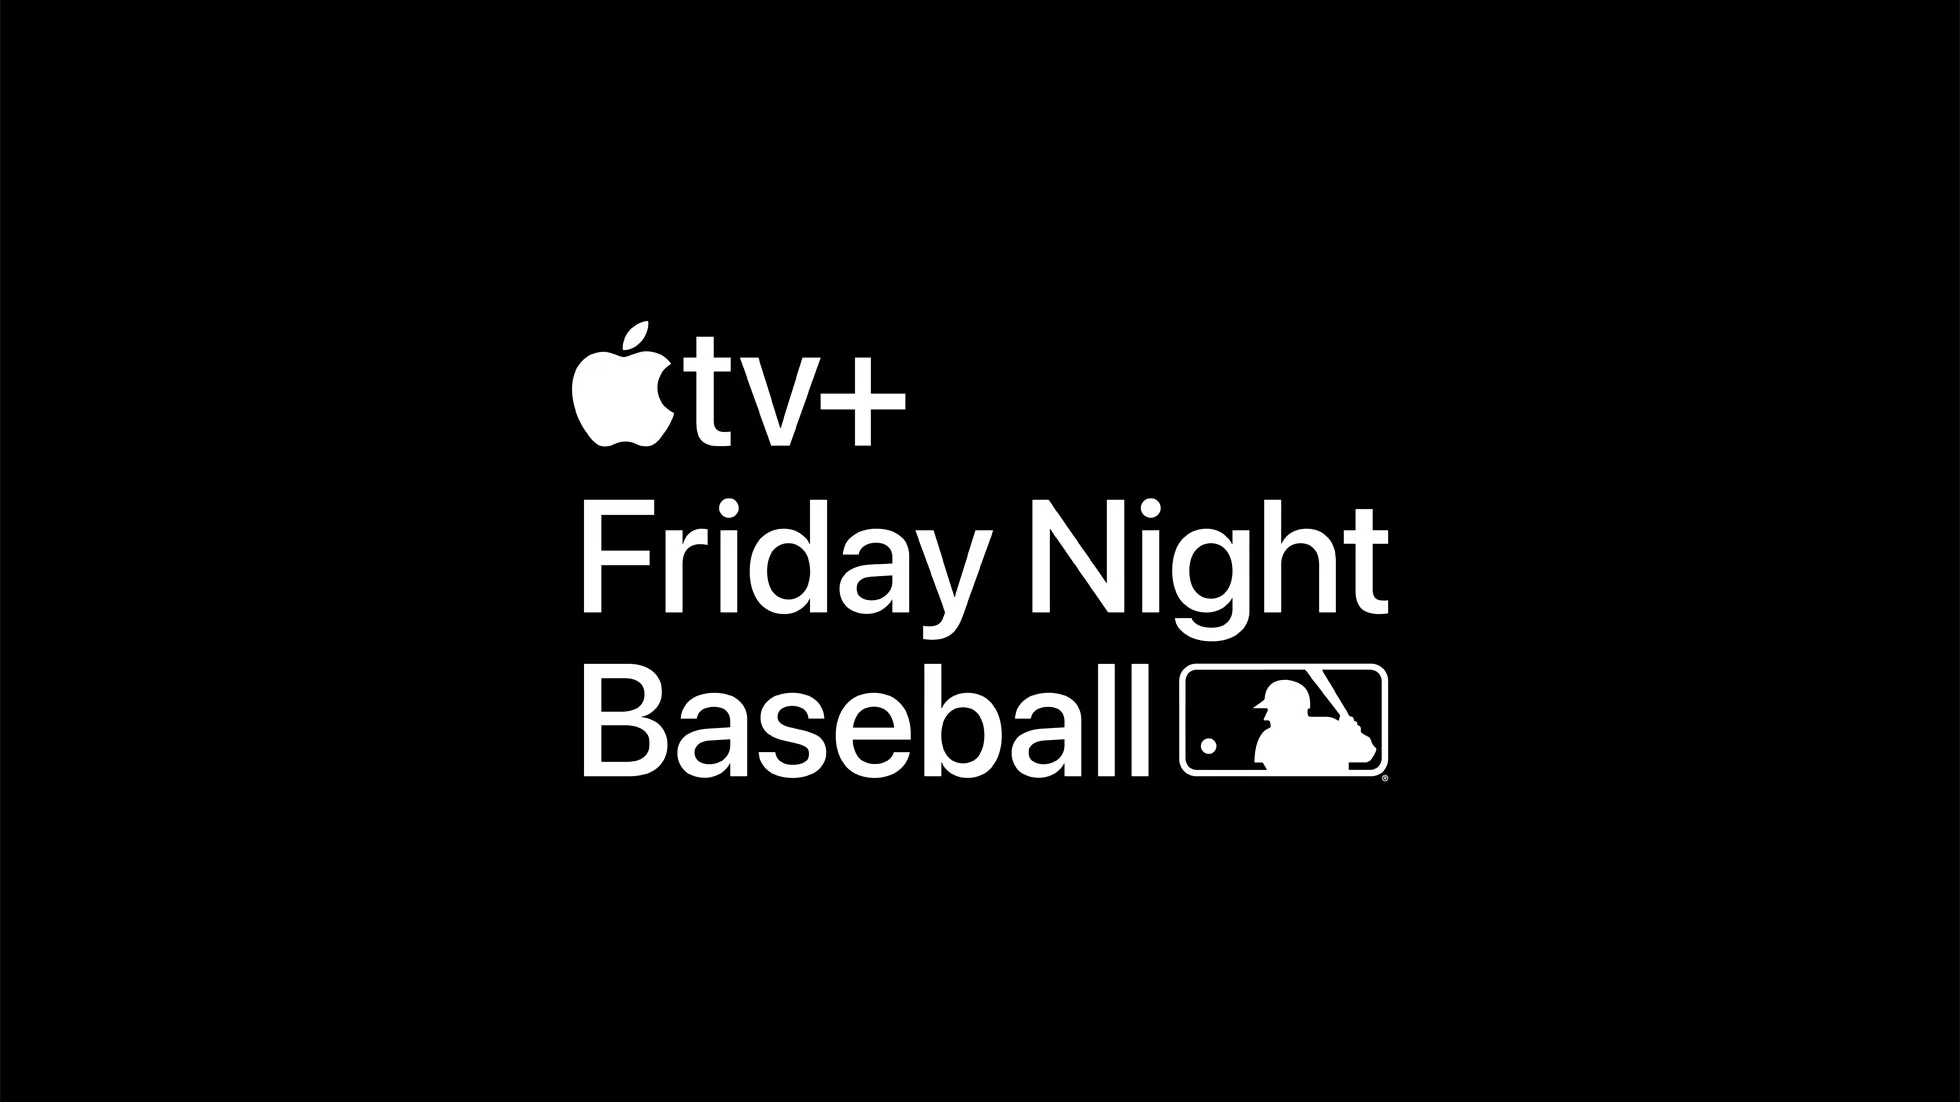 Tigers shelled by Yankees on Friday Night Baseball WTVB 1590 AM